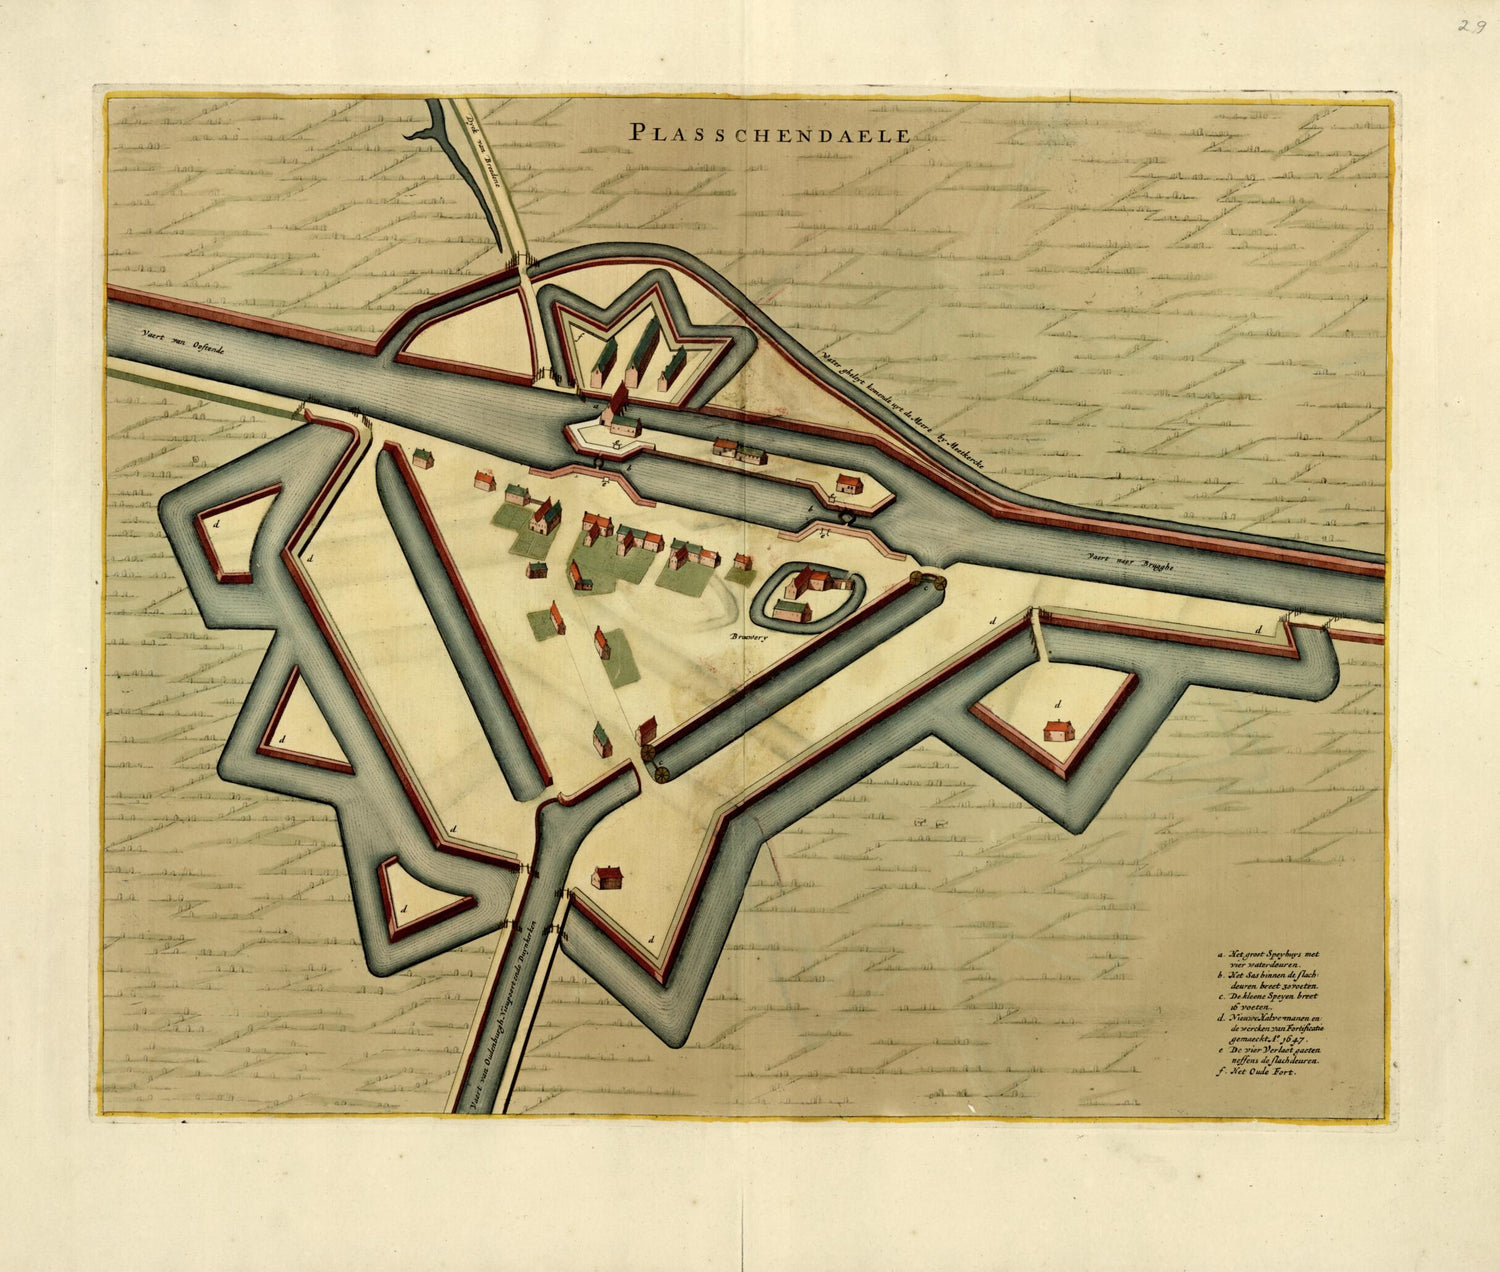 This old map of Plasschendaele from a Collection of Plans of Fortifications and Battles, 1684-from 1709 from 1709 was created by Anna Beeck in 1709